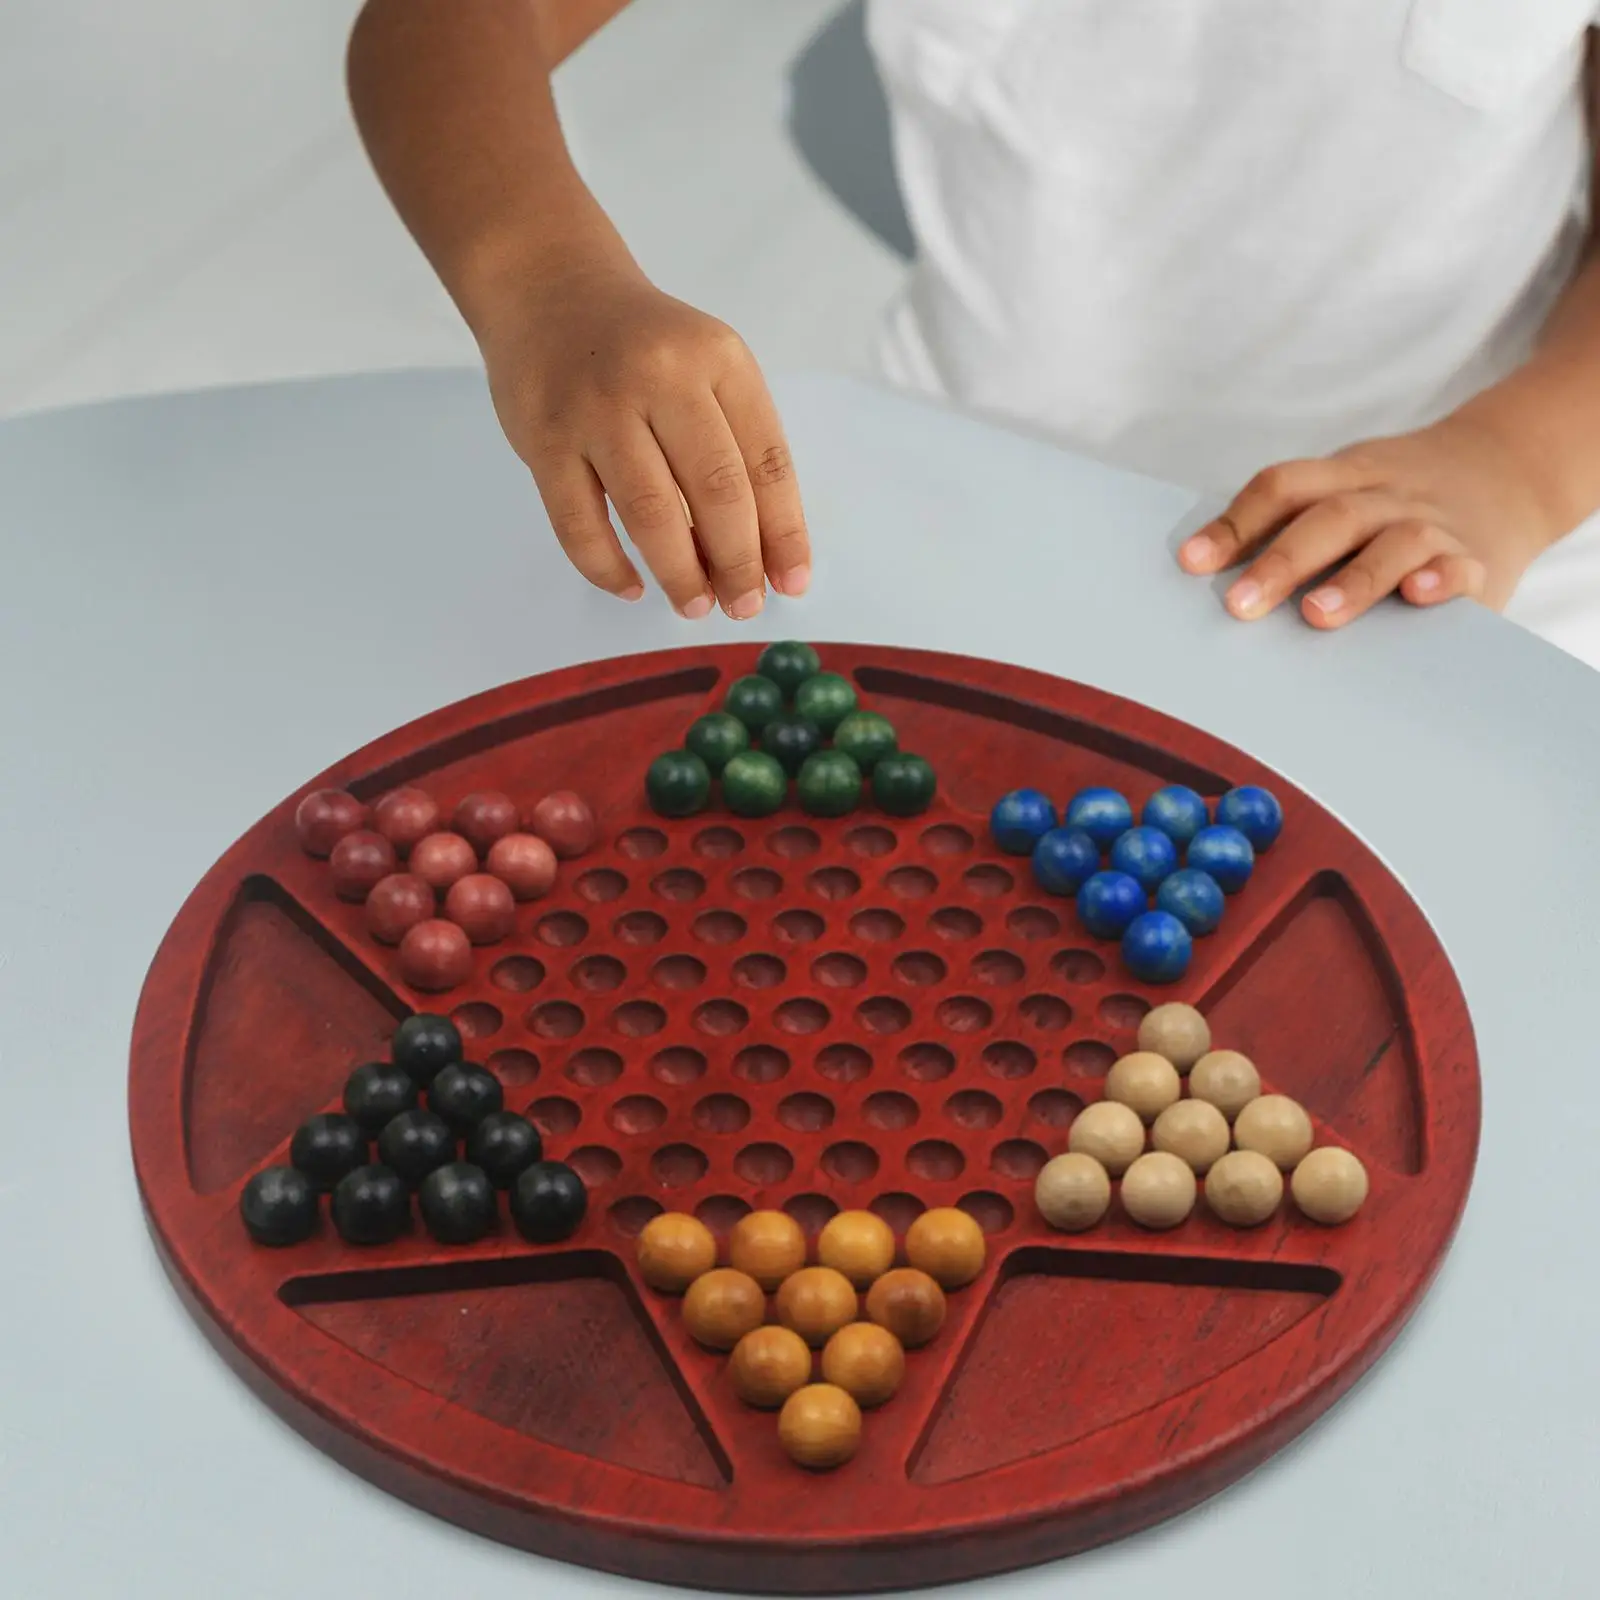 

Chinese Checkers 60 Wood Marbles Creative Storage Multiplayer Handmade Children Gifts Fun Game Toy for Ages 6+ Board Games